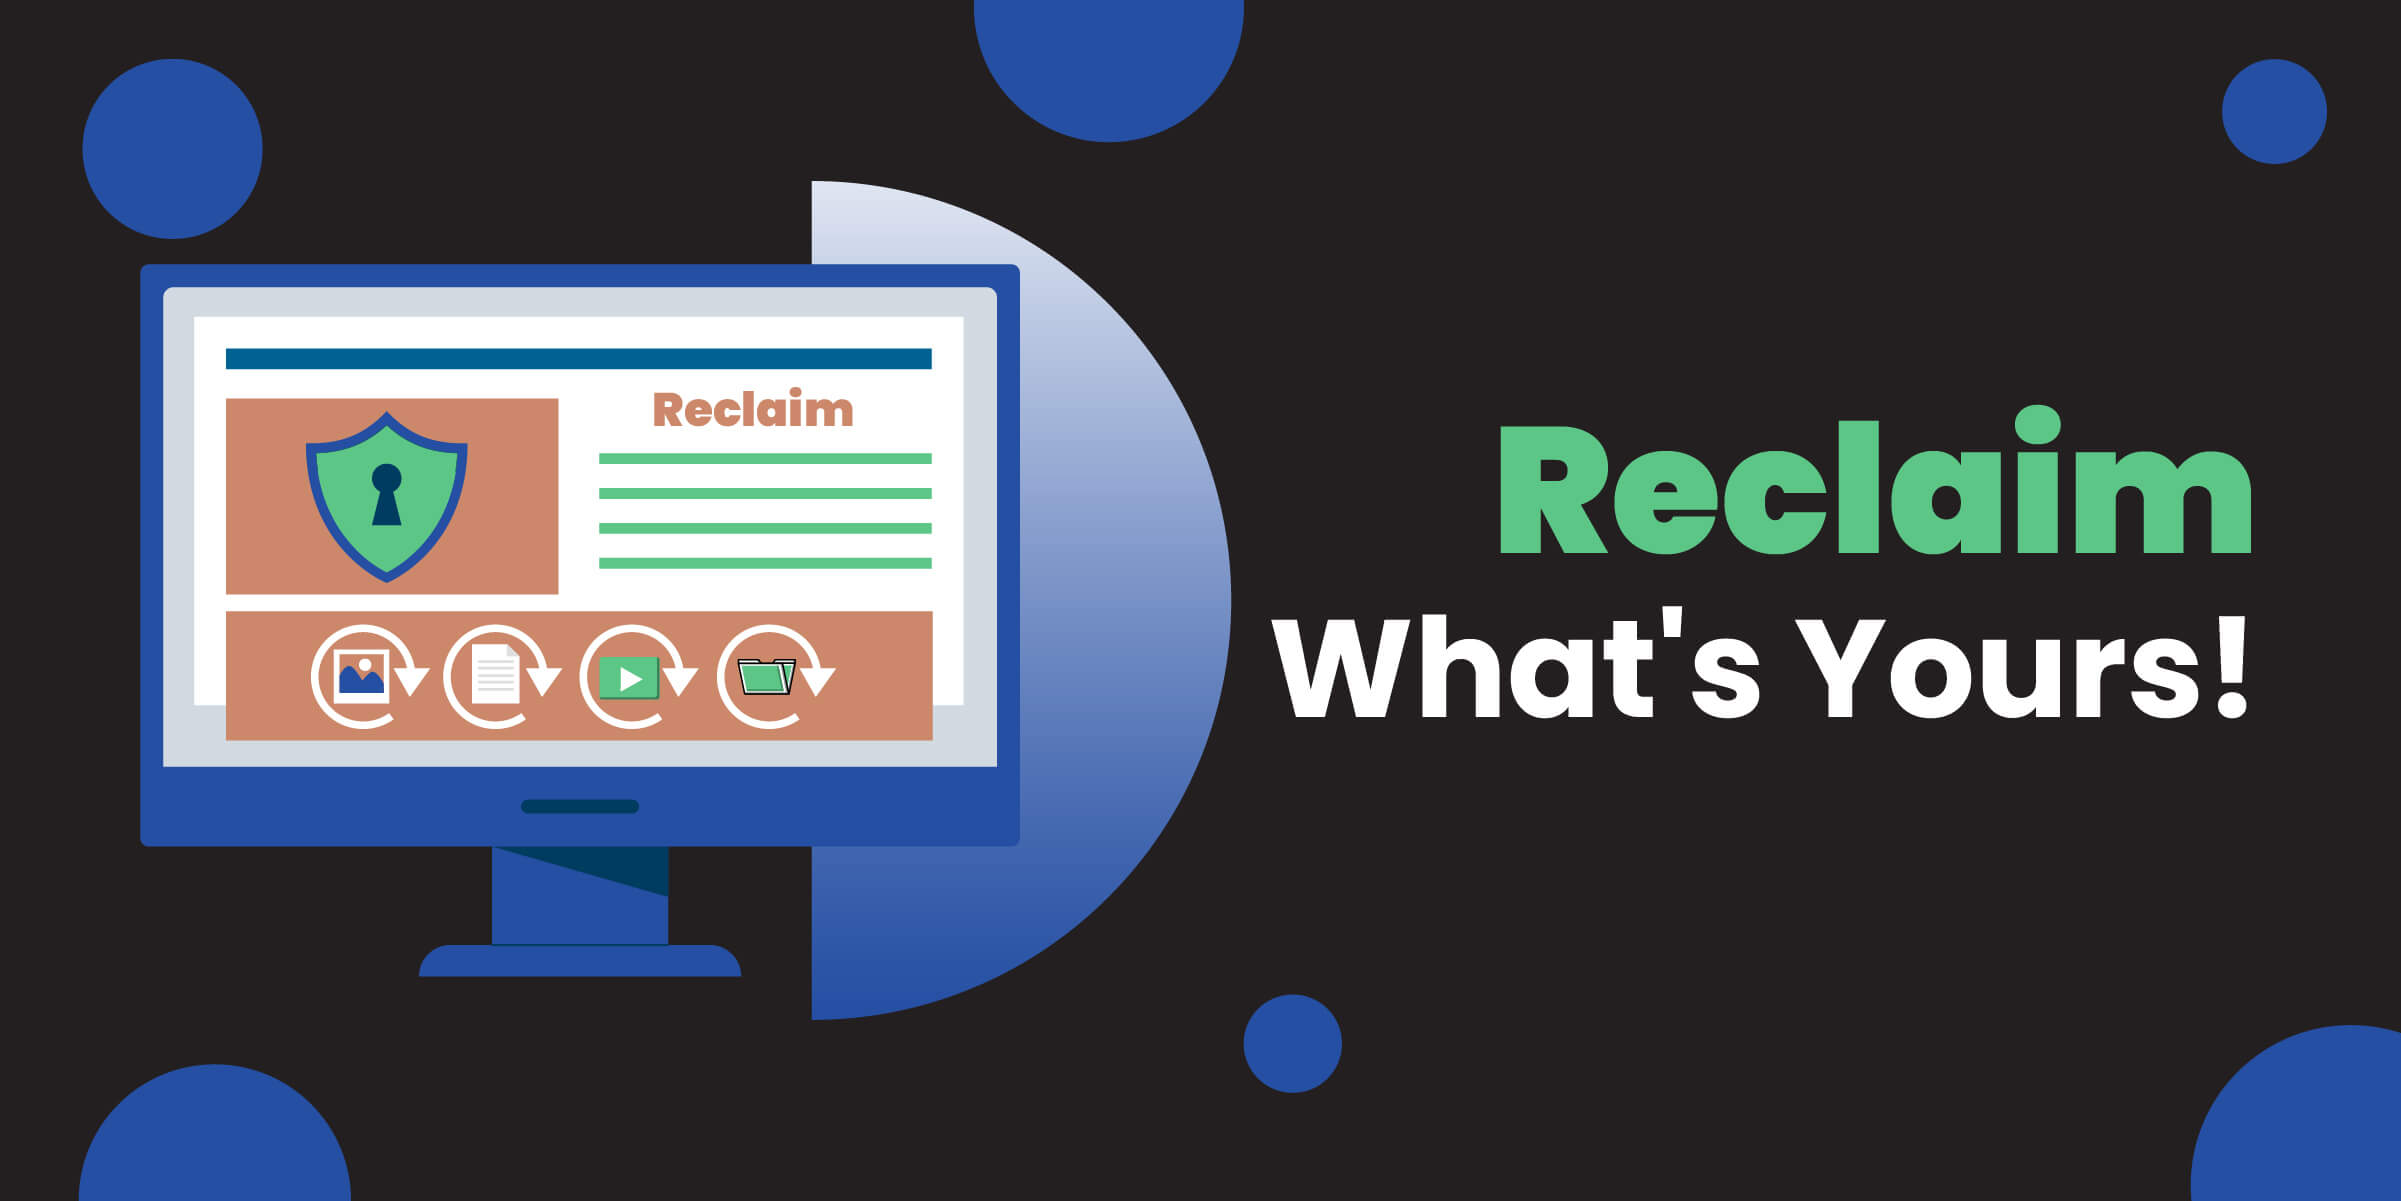 Reclaim What's Yours